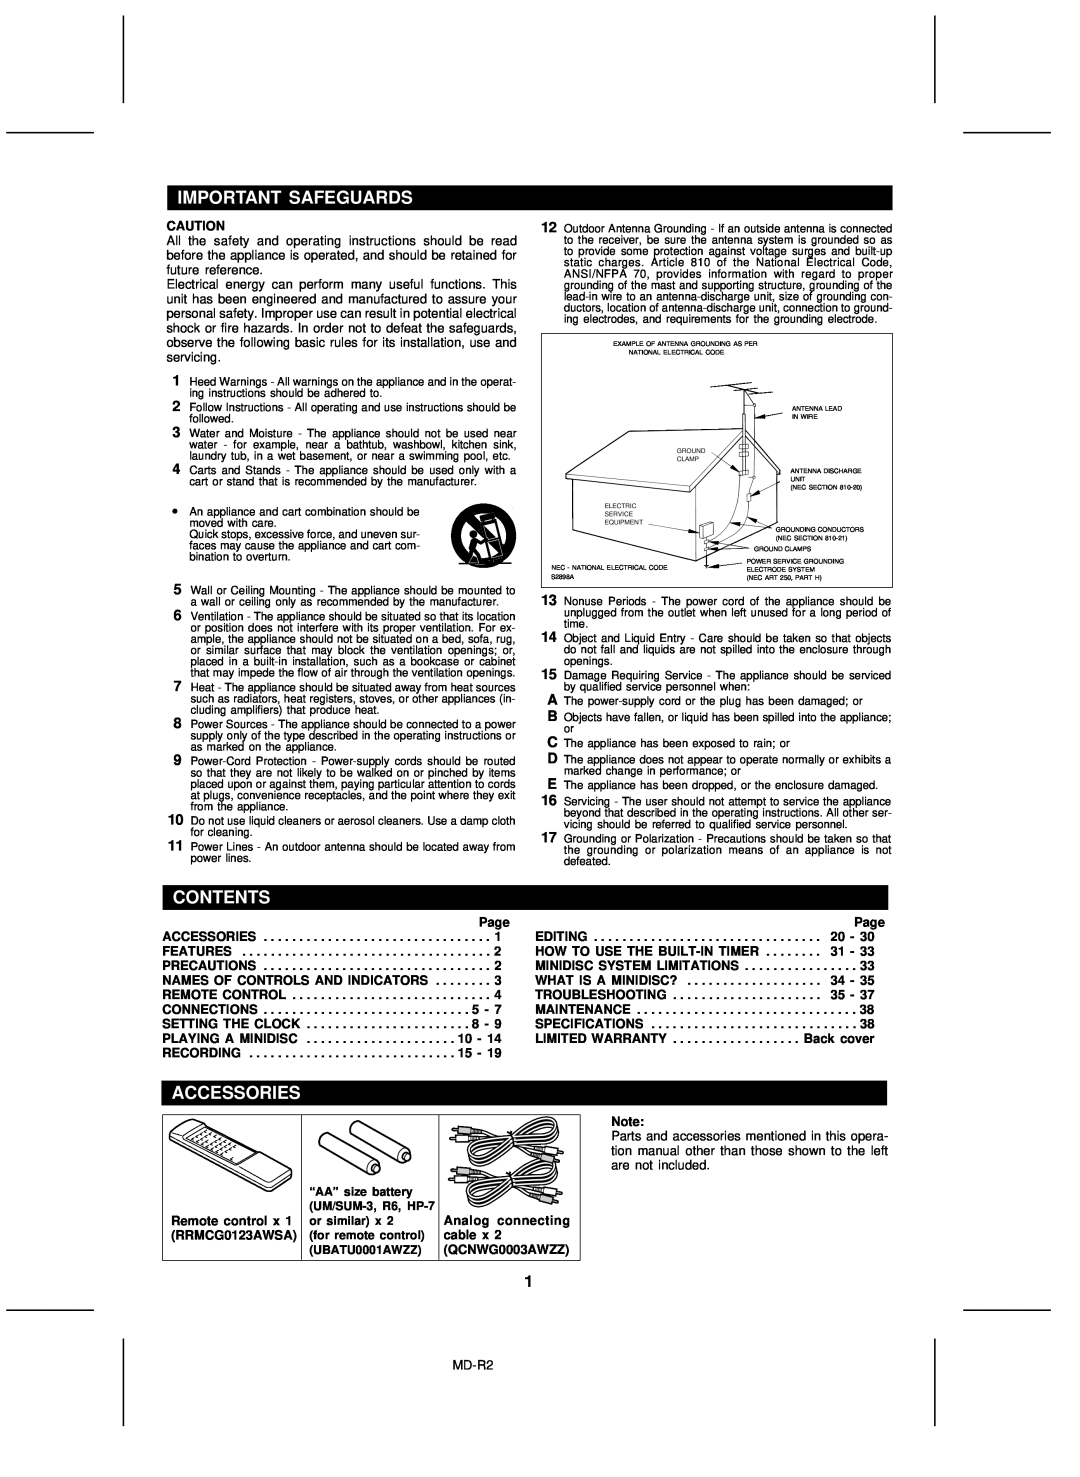 Kenwood MD-R2 Important Safeguards, Contents, Accessories, Page, Analog connecting, Remote control x, RRMCG0123AWSA 